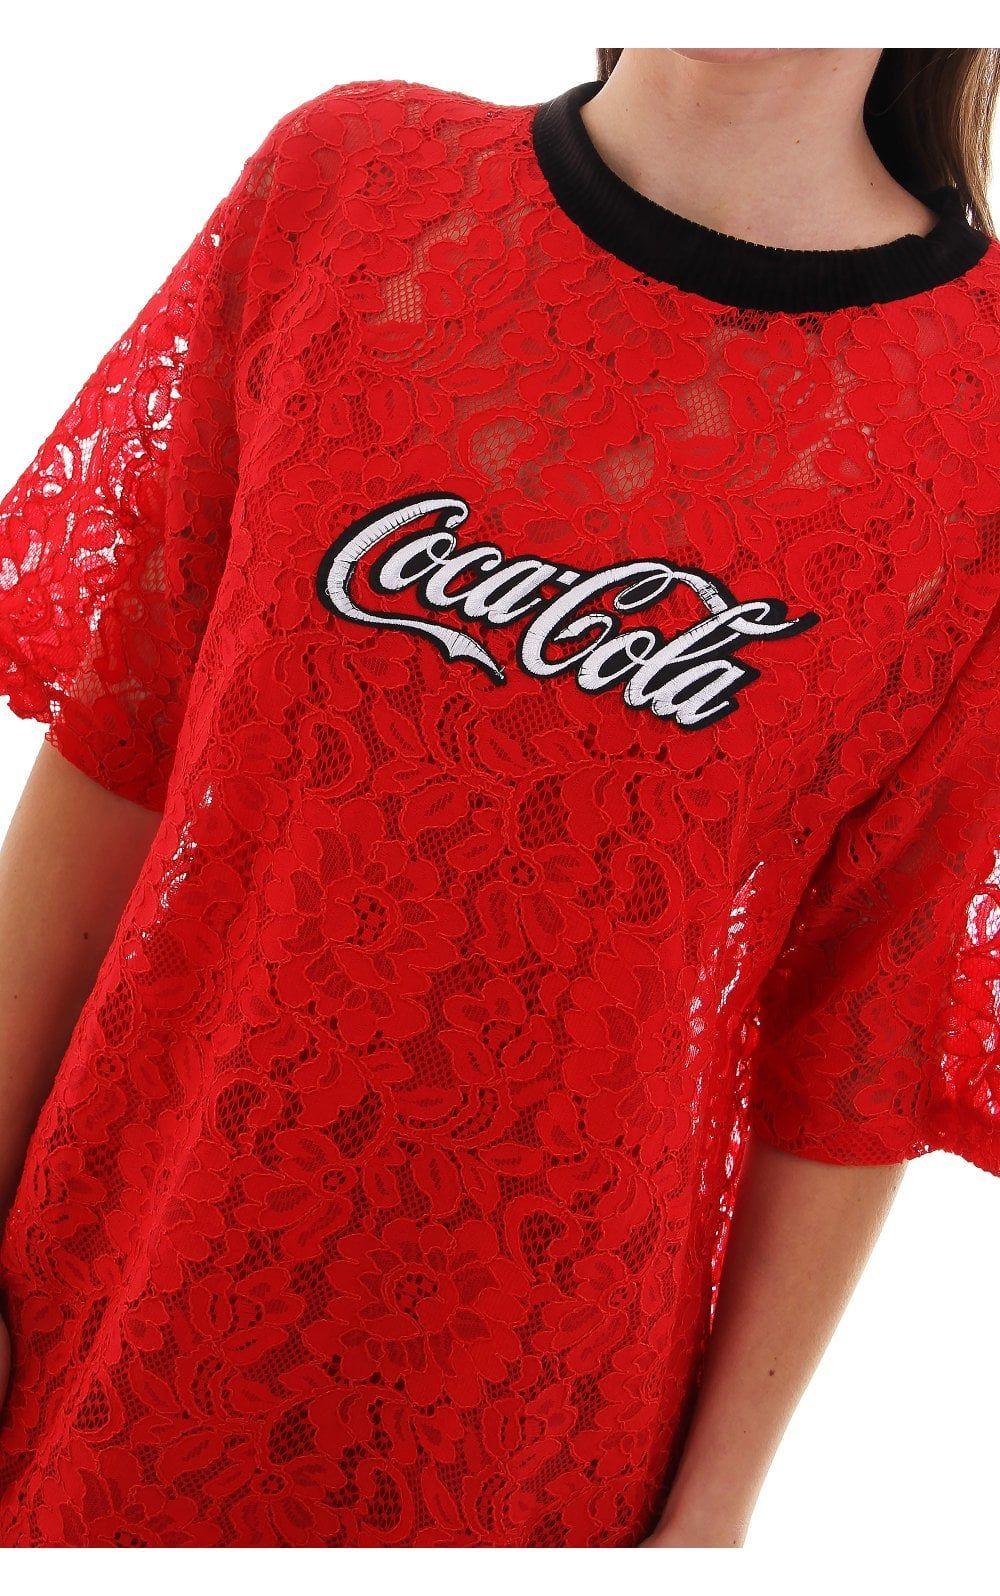 Red House Clothing Logo - House Of Stars House Of Stars Coca Cola Lace T Shirt Dress With Logo